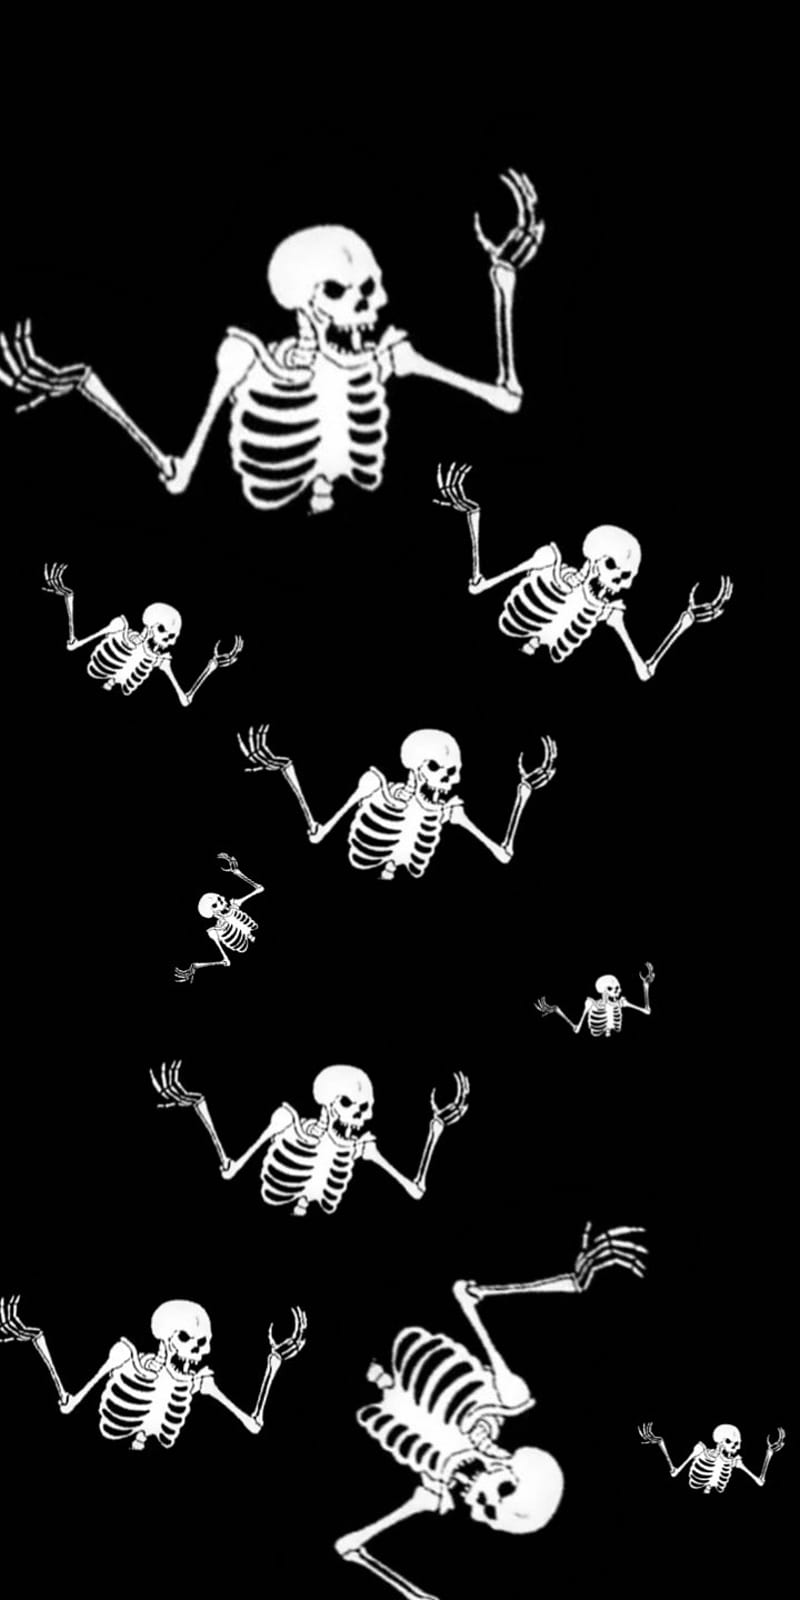 Scary Skeleton Wallpaper (66+ images)